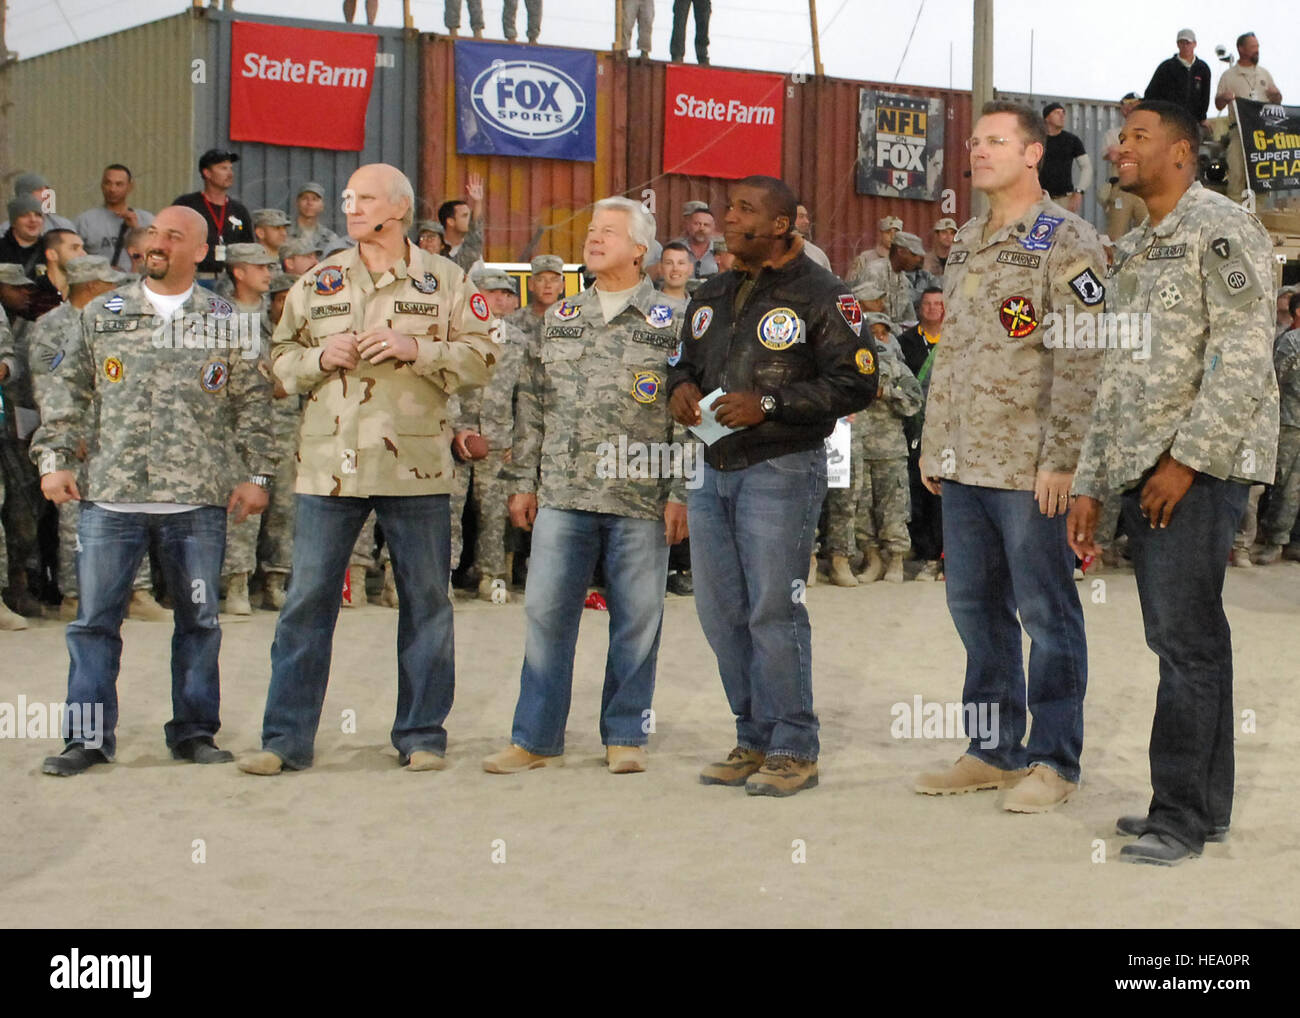 BAGRAM AIR FIELD, Afghanistan -- (From left to right) Jay Glazer, Terry Bradshaw, Jimmy Johnson, Curt Menefee, Howie Long, and Michael Strahan, the “Fox NFL Sunday” team, wait for the start of the pregame Nov. 7, 2009.  The “Fox NFL Sunday” team is scheduled to broadcast live Nov. 8, 2009 from here.  Senior Airman Felicia Juenke) Stock Photo